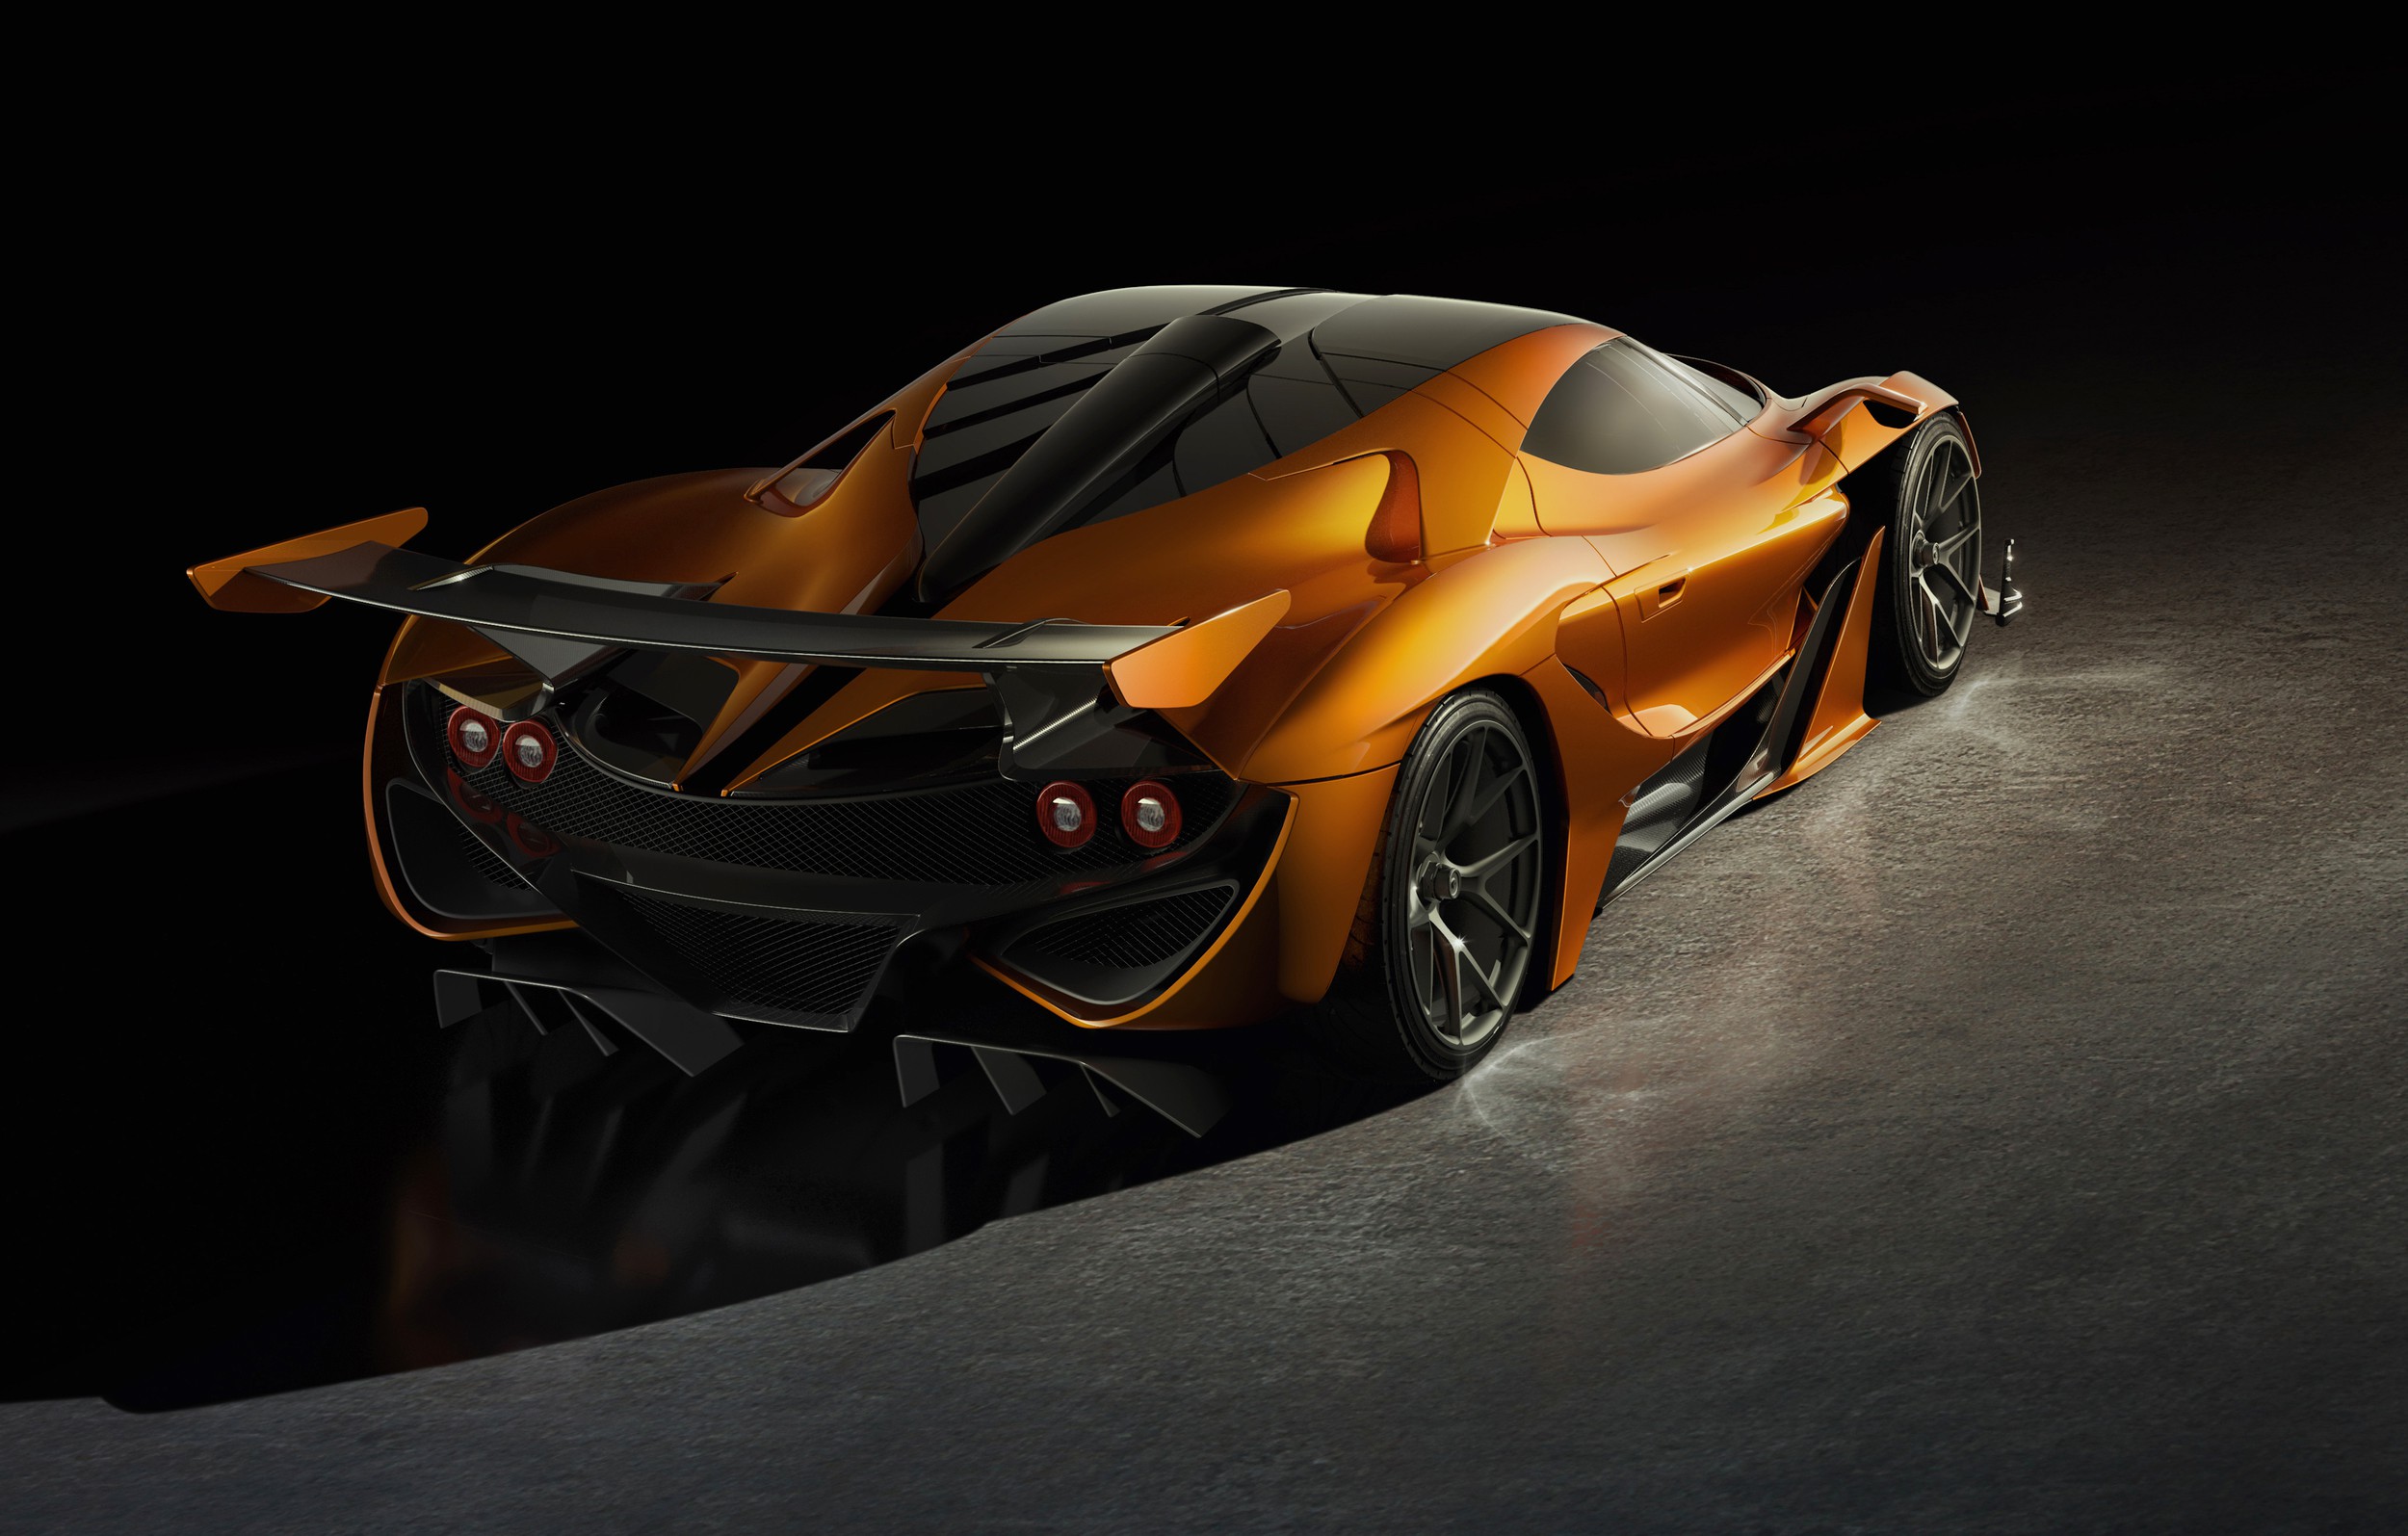 Apollo Arrow Concept Car (Reversed Image) - Back by ROGUE-RATTLESNAKE on  DeviantArt